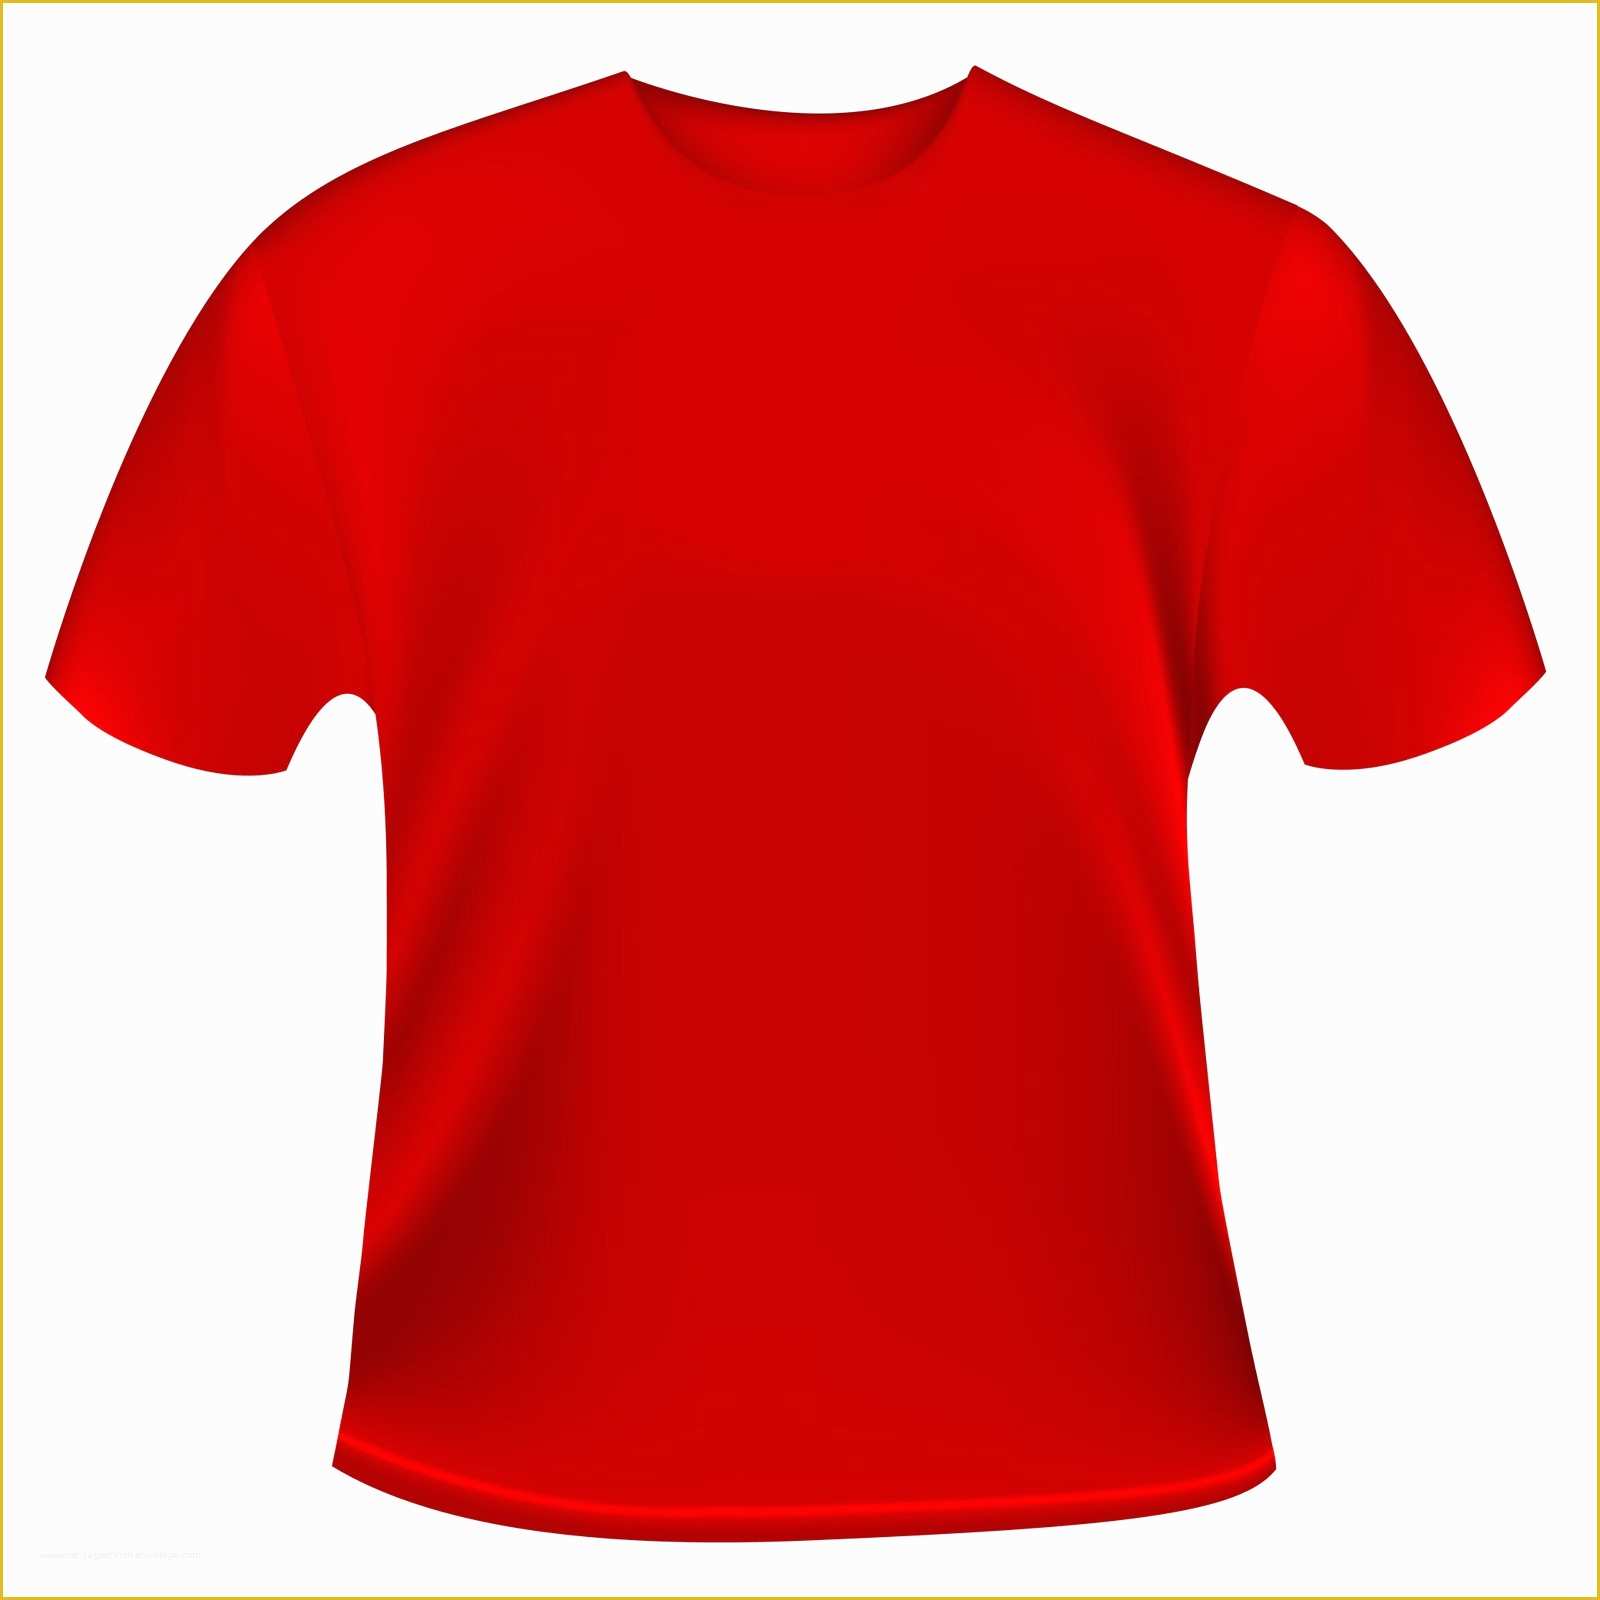 Free Shirt Templates Of Red Shirt Clipart Clipart Suggest